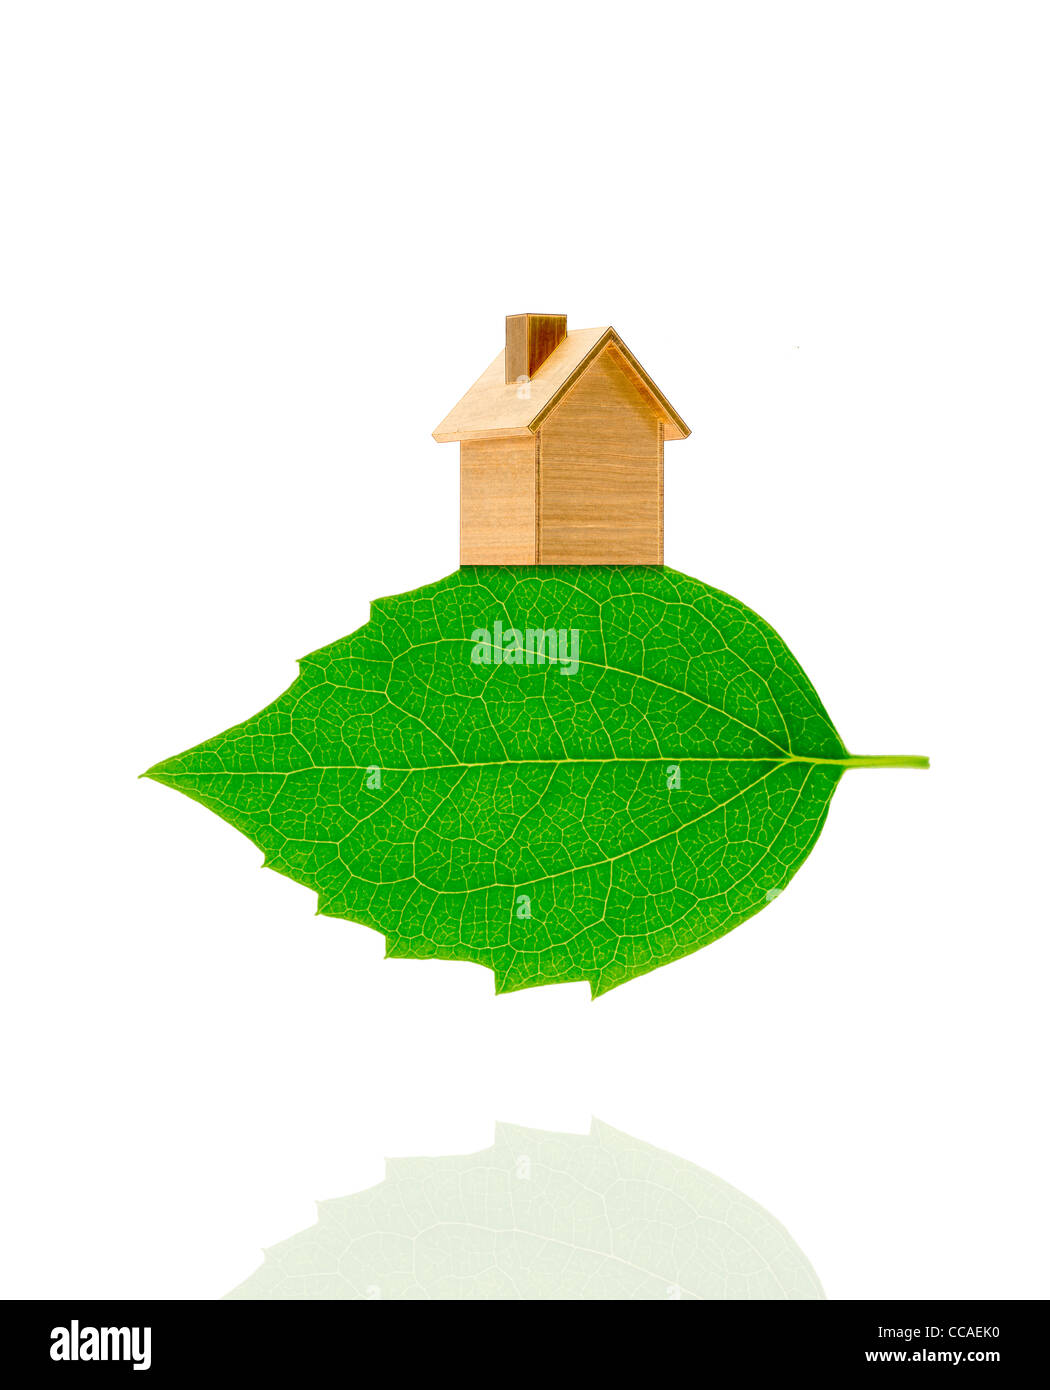 Wooden House on Leaf Stock Photo